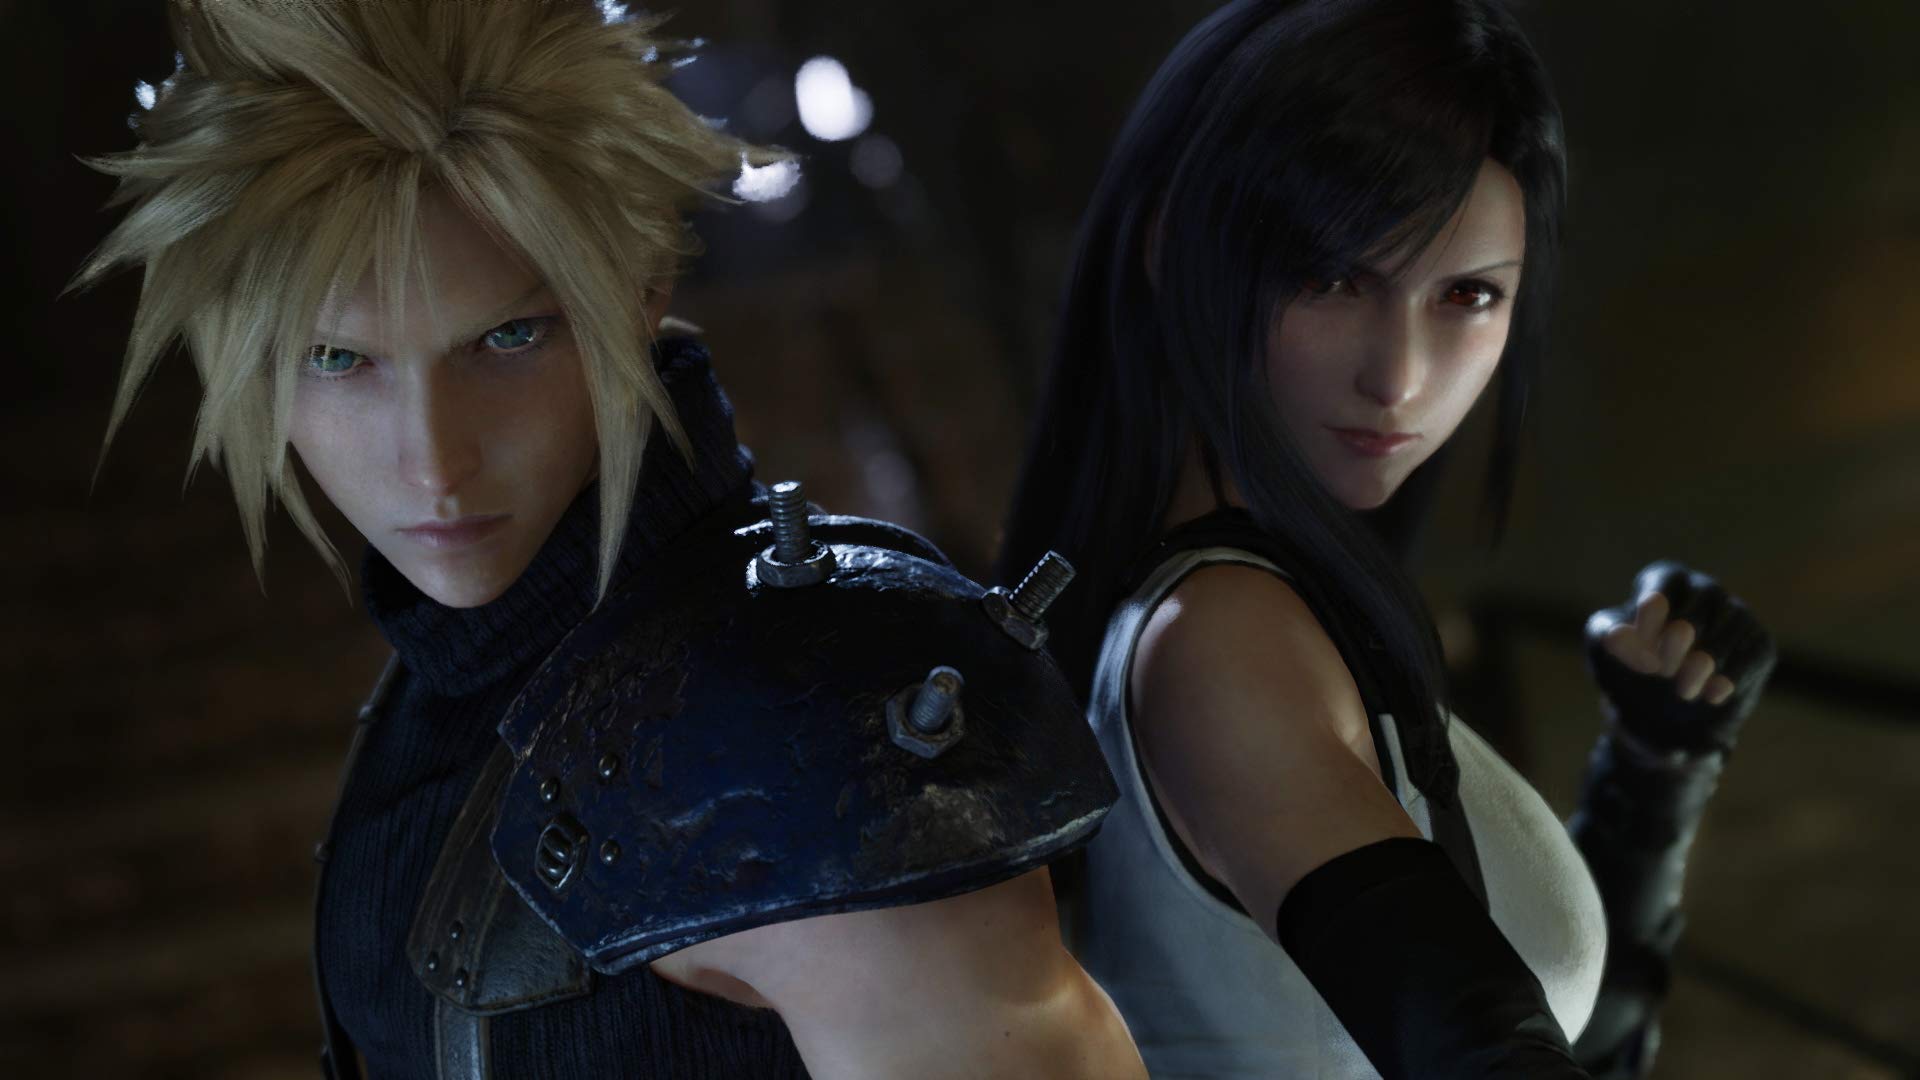 Cloud and Tifa back-to-back